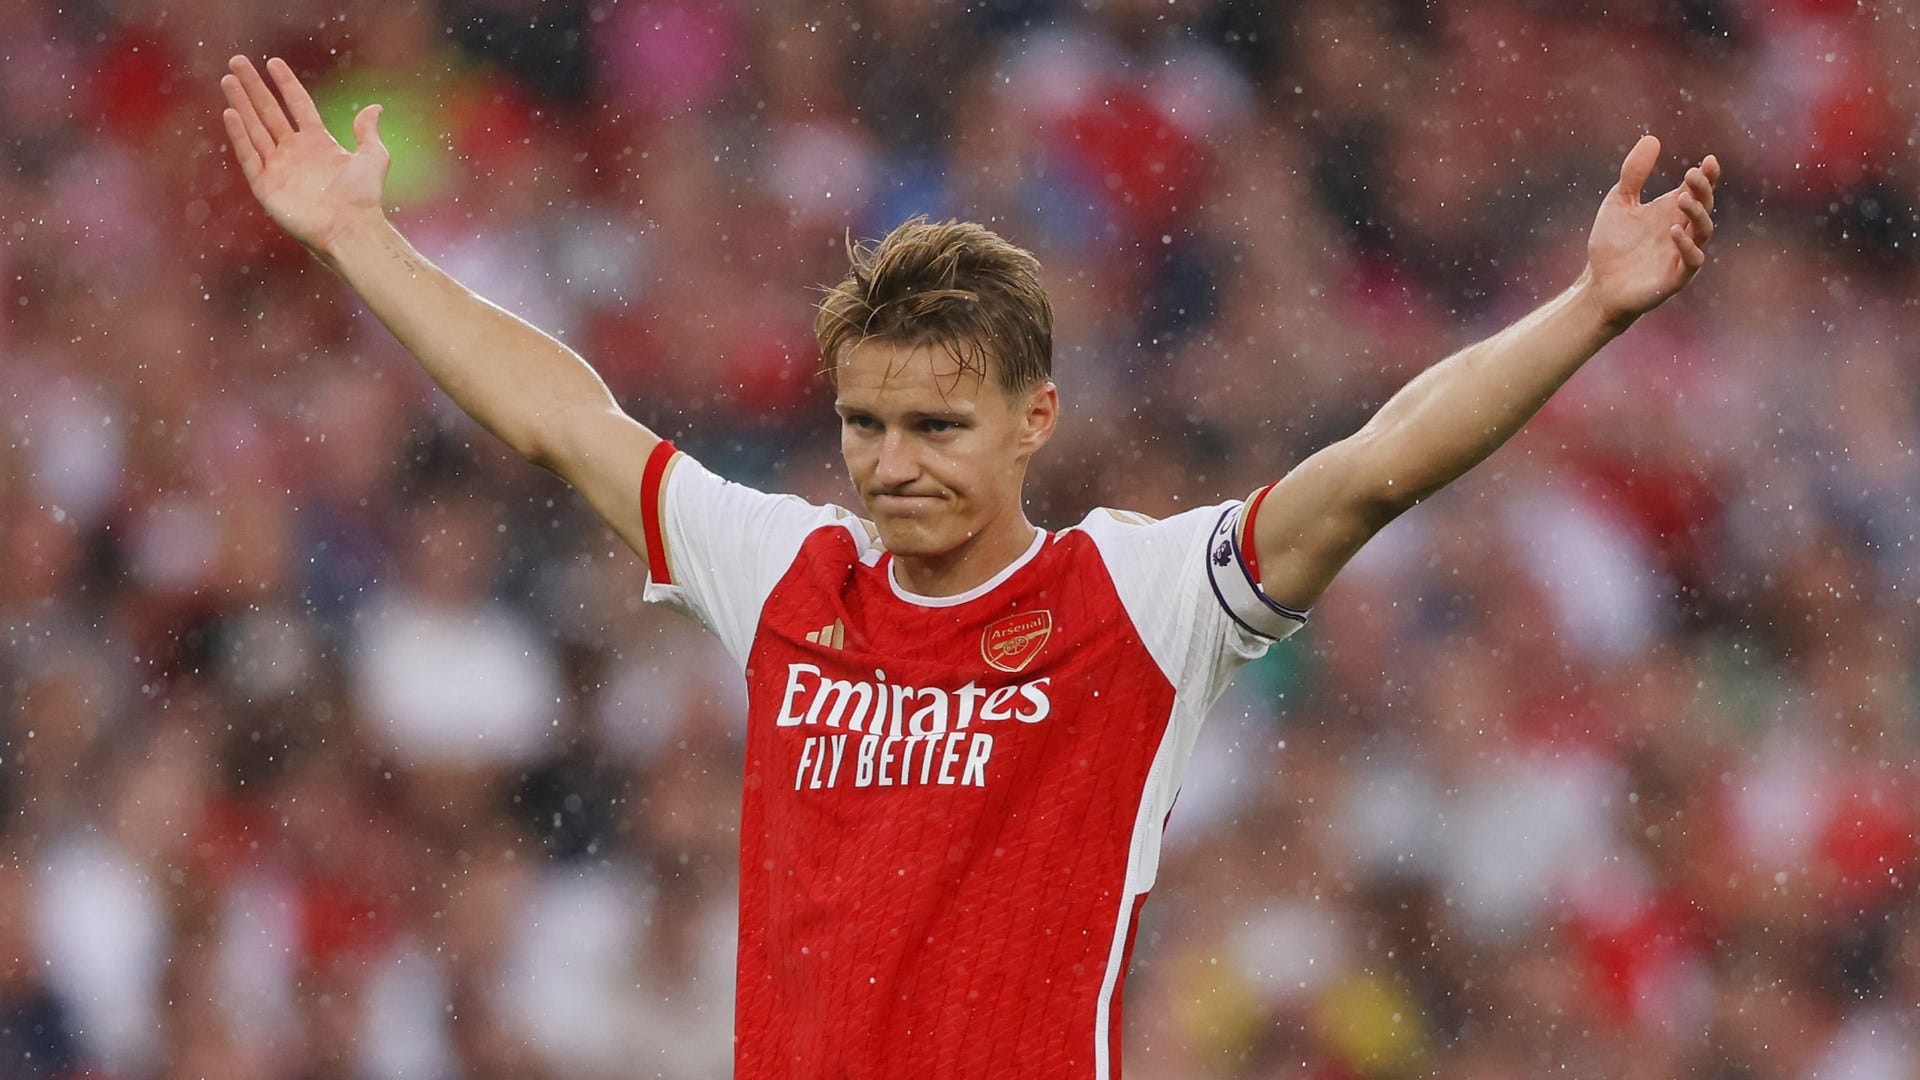 Five more years! Martin Odegaard signs new Arsenal contract until 2028 and becomes Gunners' highest-paid player